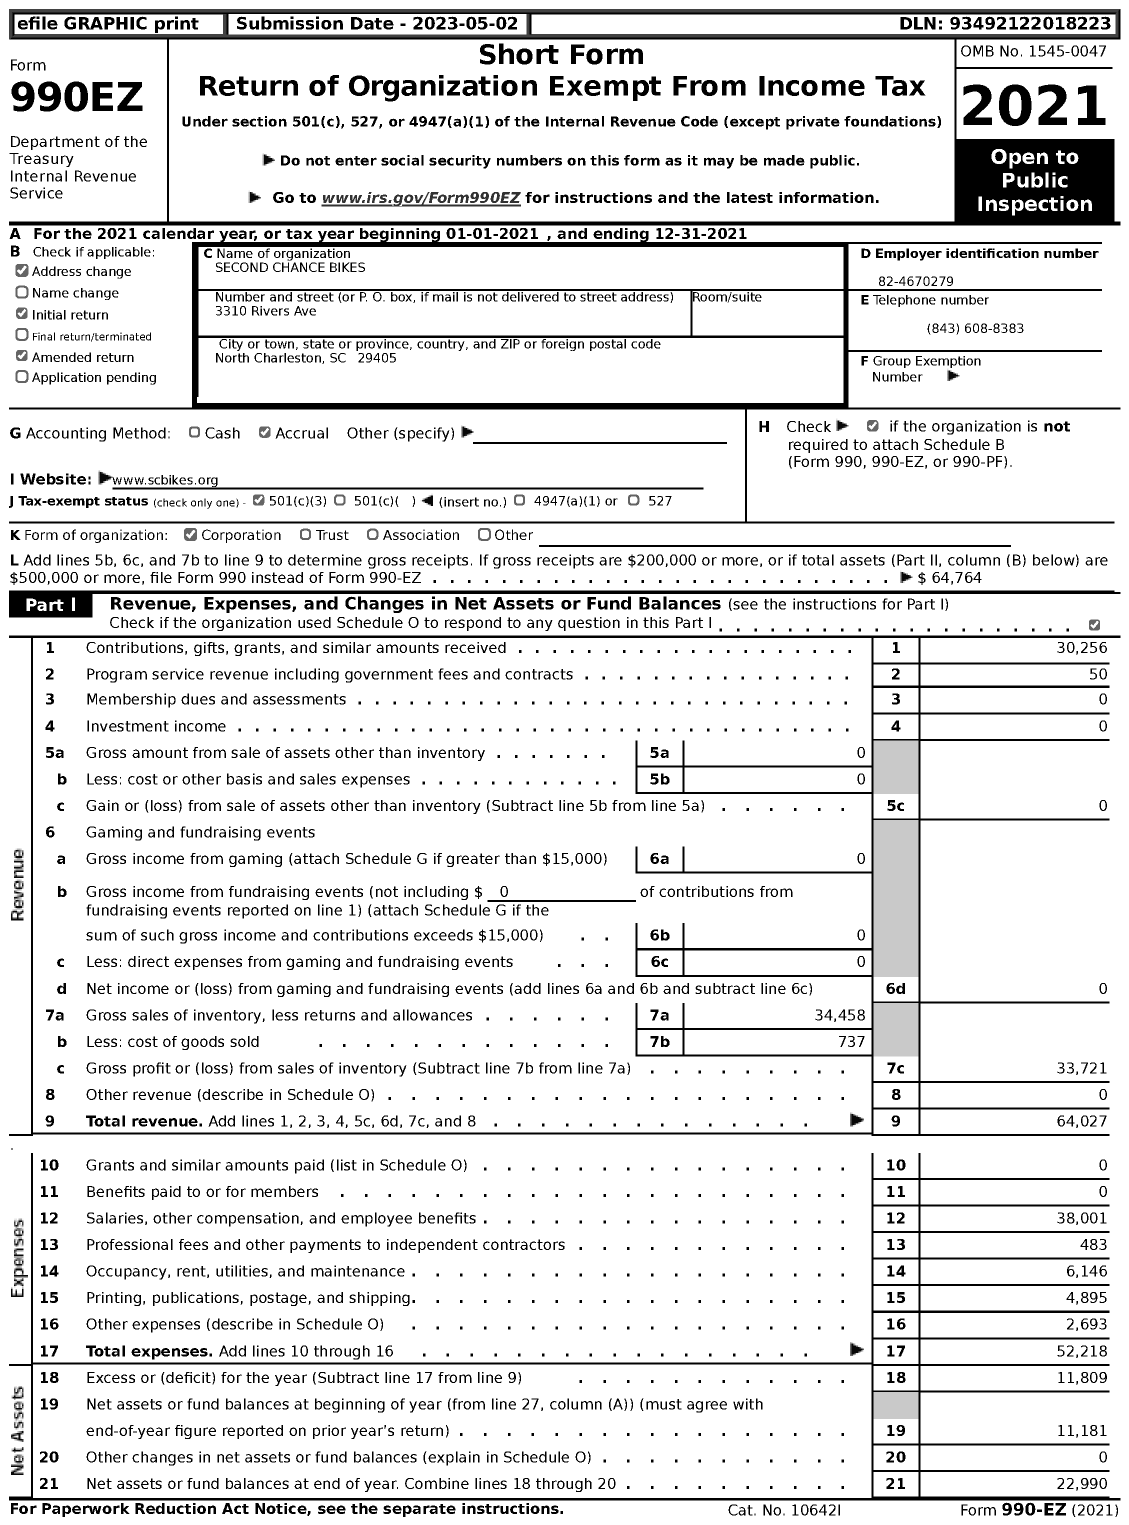 Image of first page of 2021 Form 990EZ for Second Chance Bikes